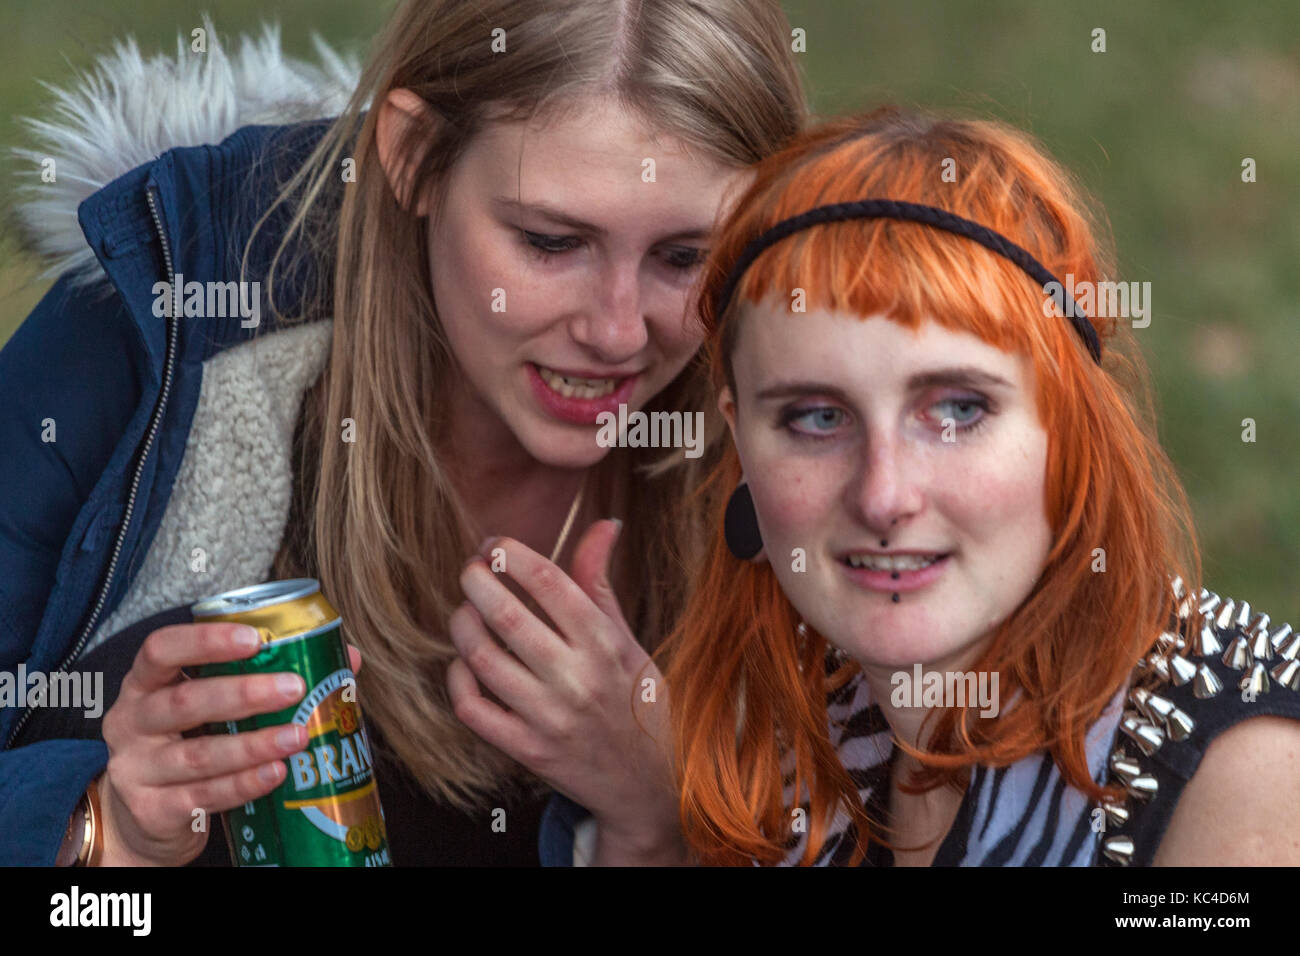 Two young girls during a conversation and drinking beer from a can, brands Branik, Prague, Czech Republic girls Friends Stock Photo